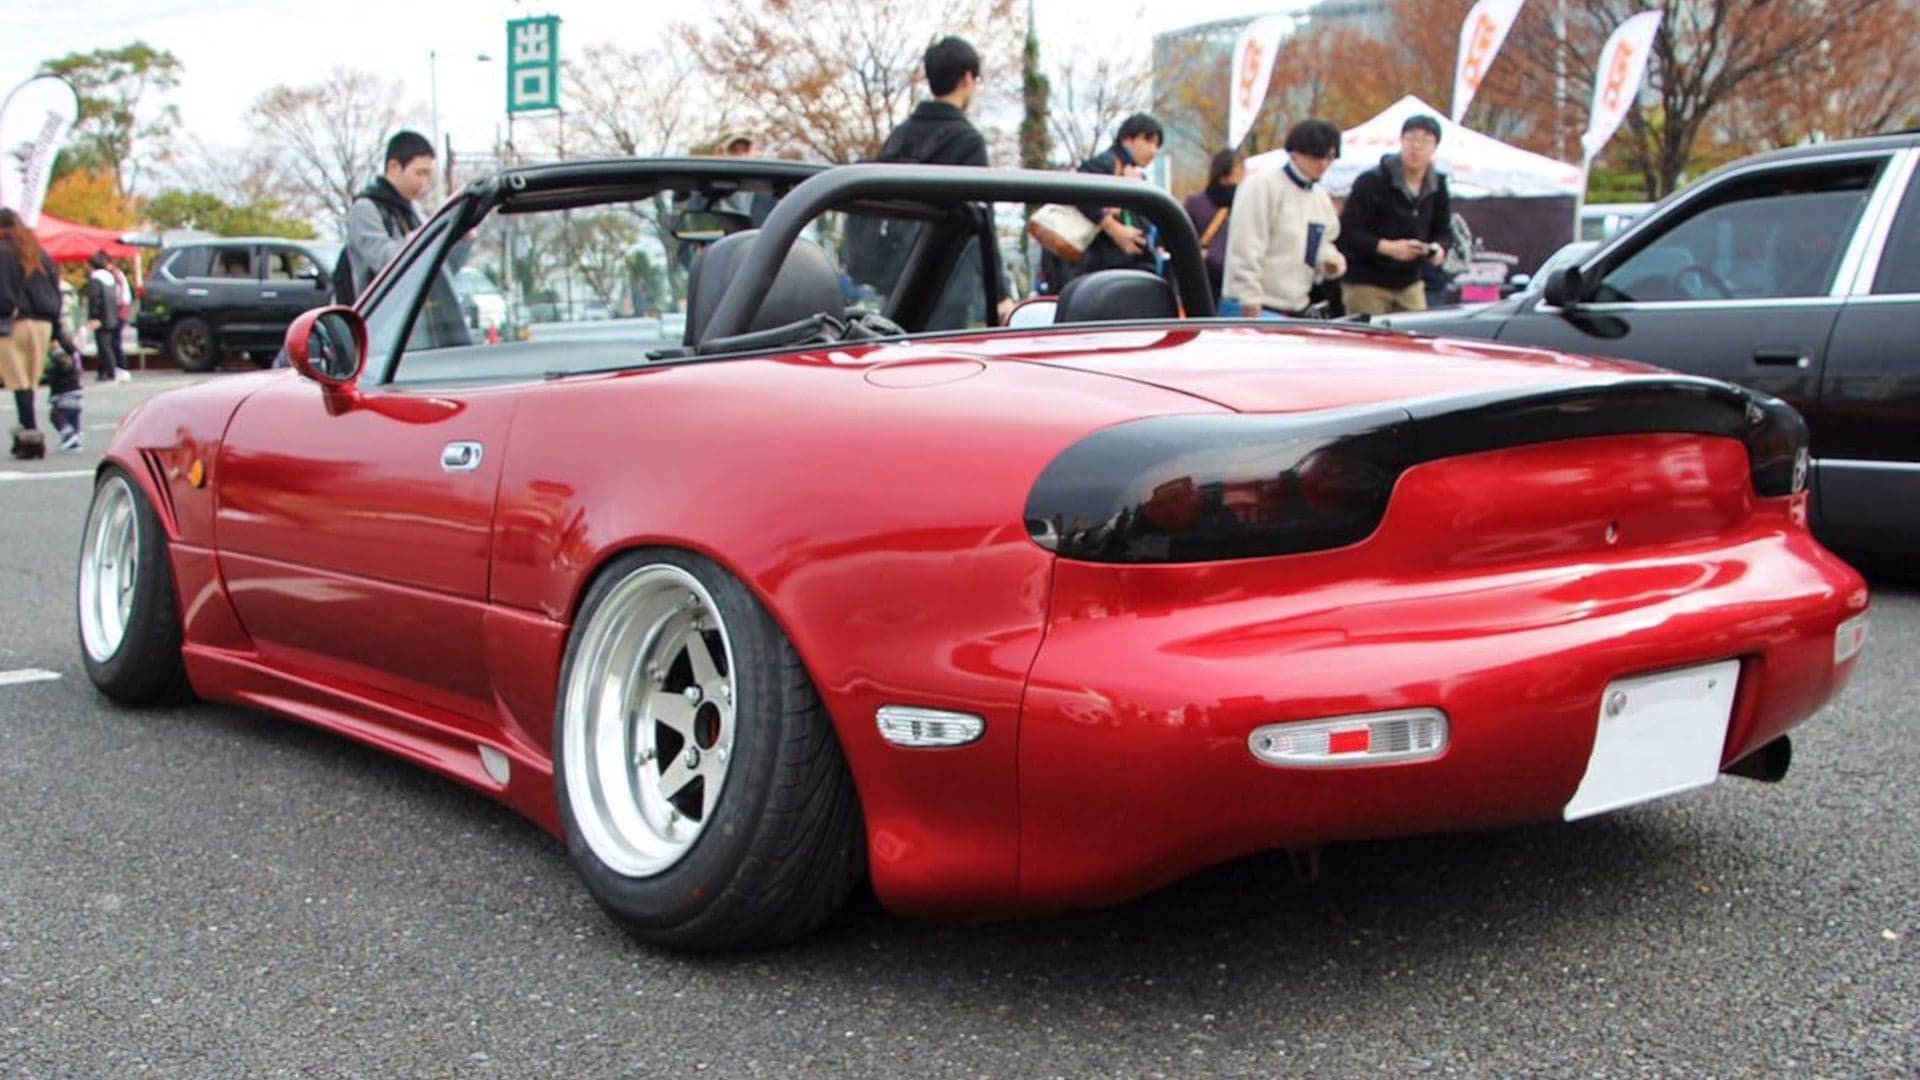 Grafting an RX-7 Rear End On the NA Miata Looks Surprisingly Sharp